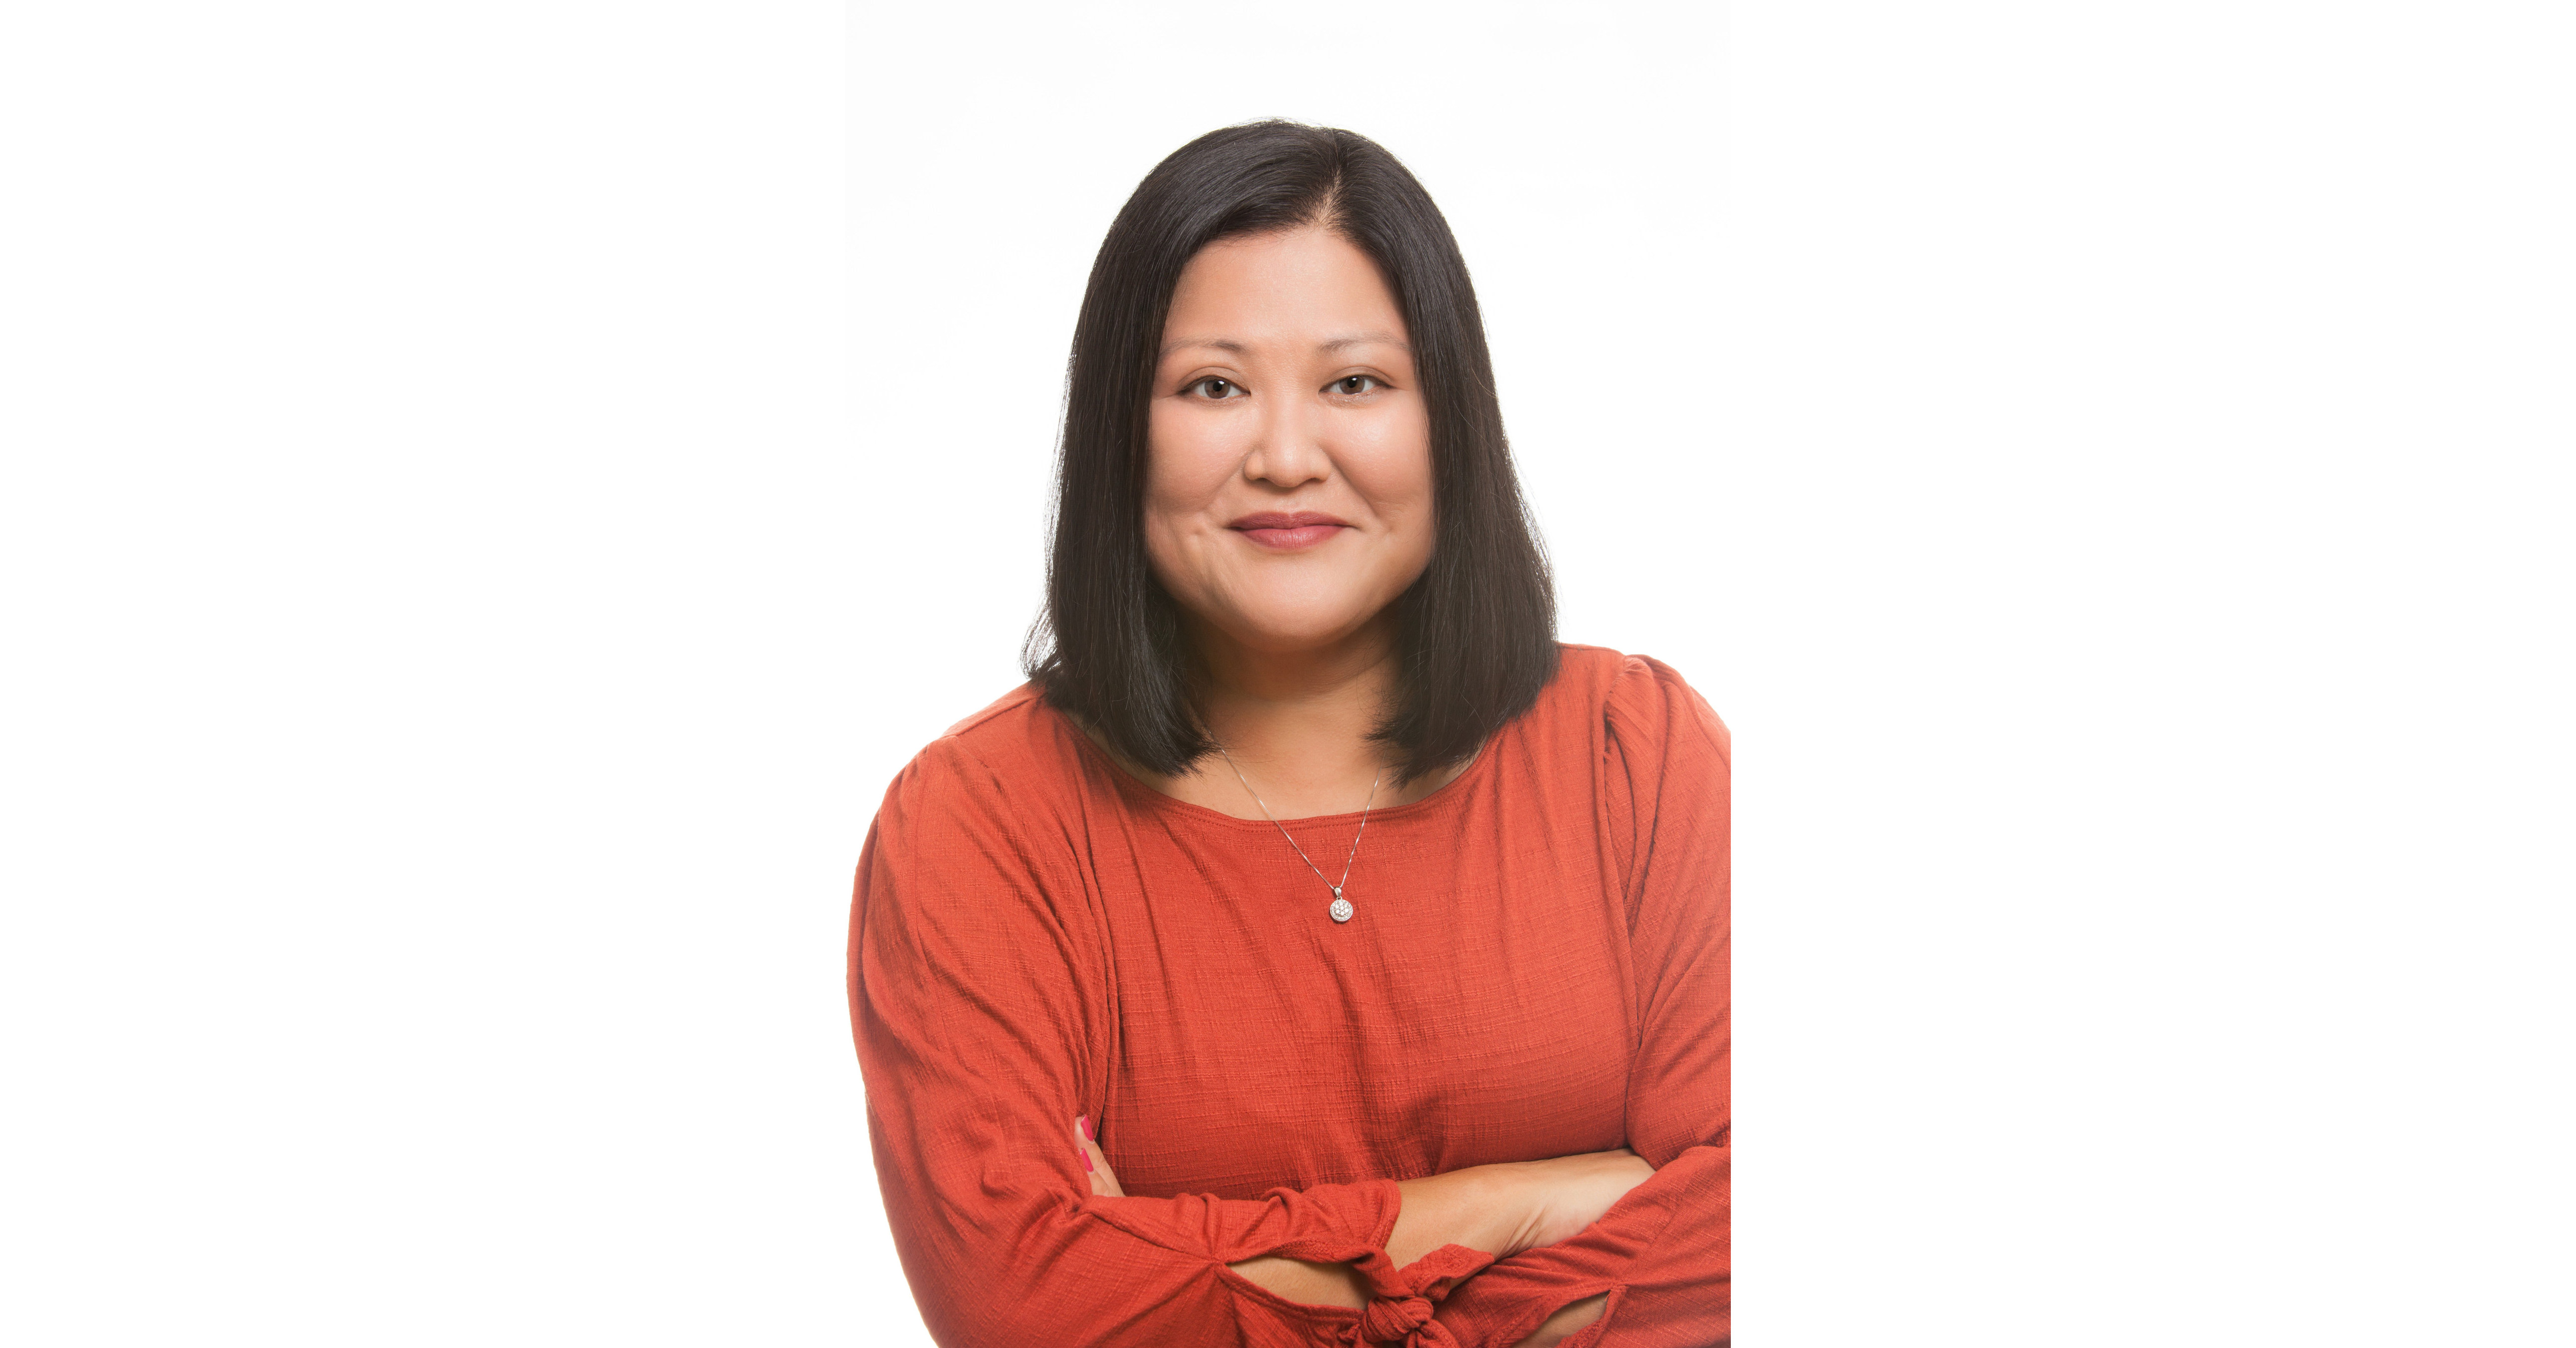 EMC Outdoor Announces the Addition of Helen Kim as SVP of Client Services